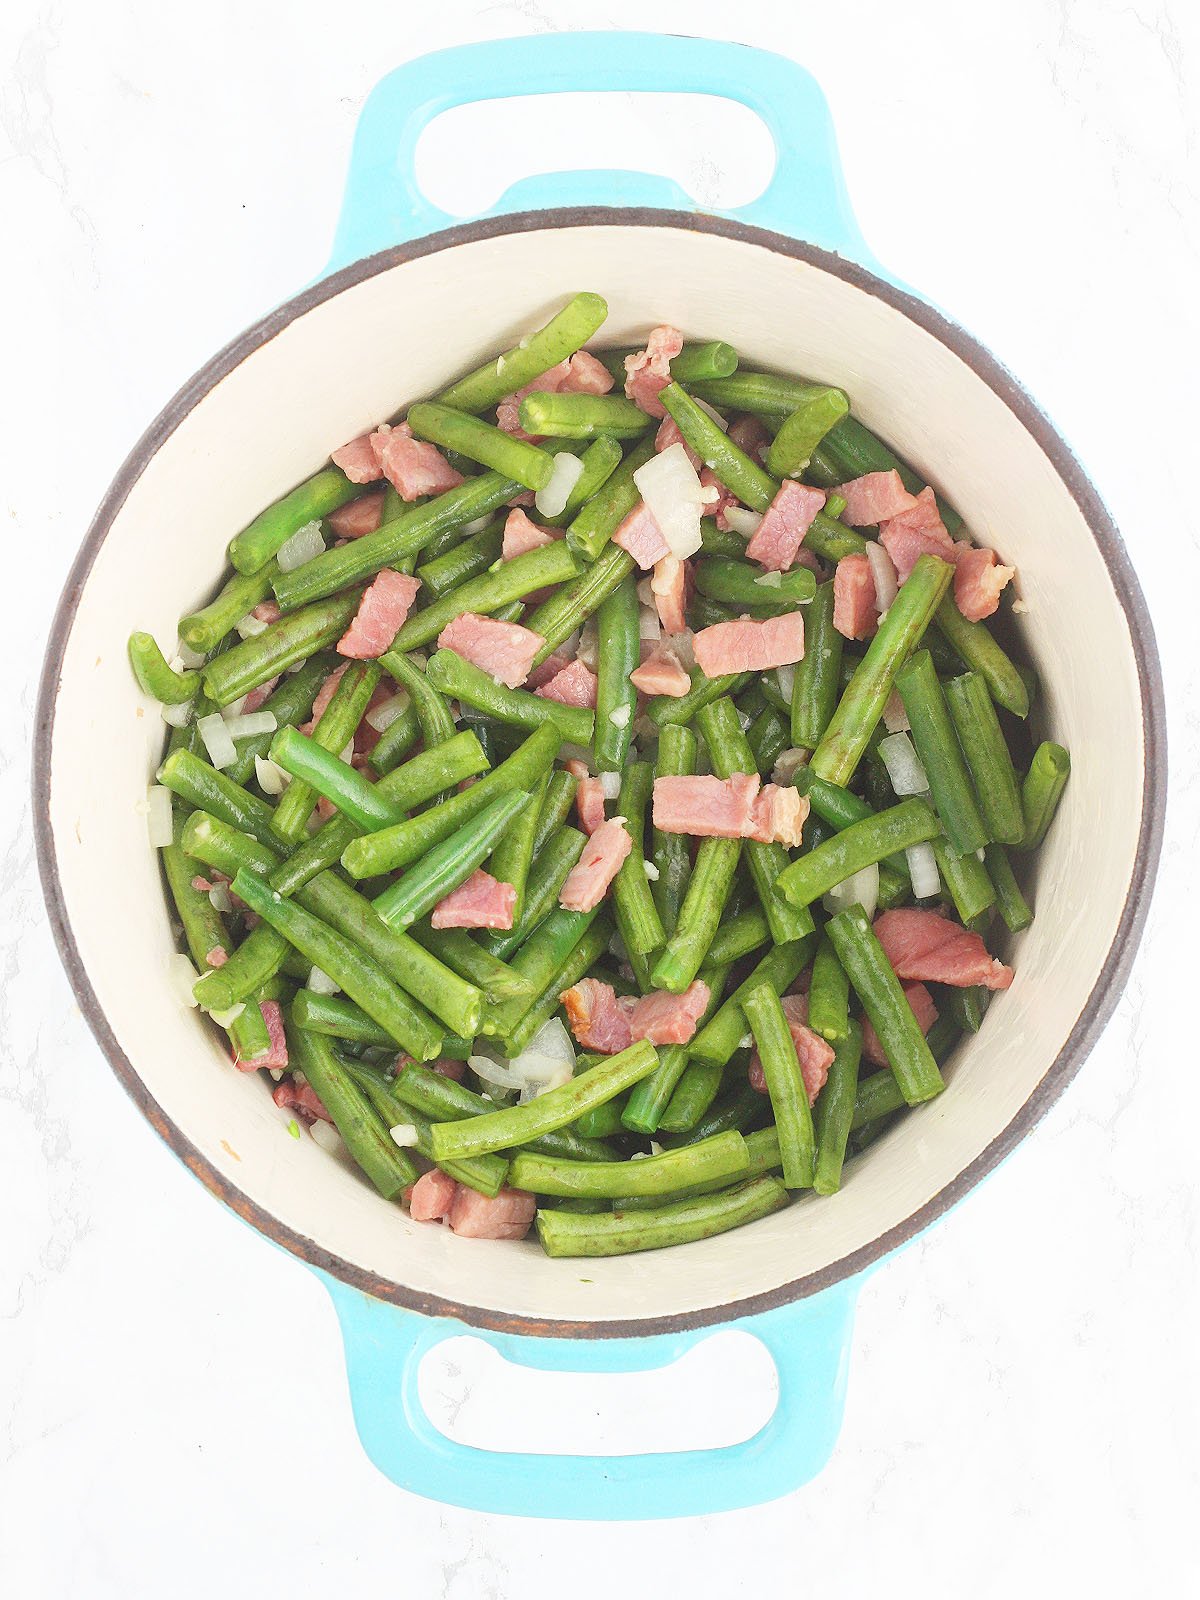 sauteing the green beans with the onion and ham